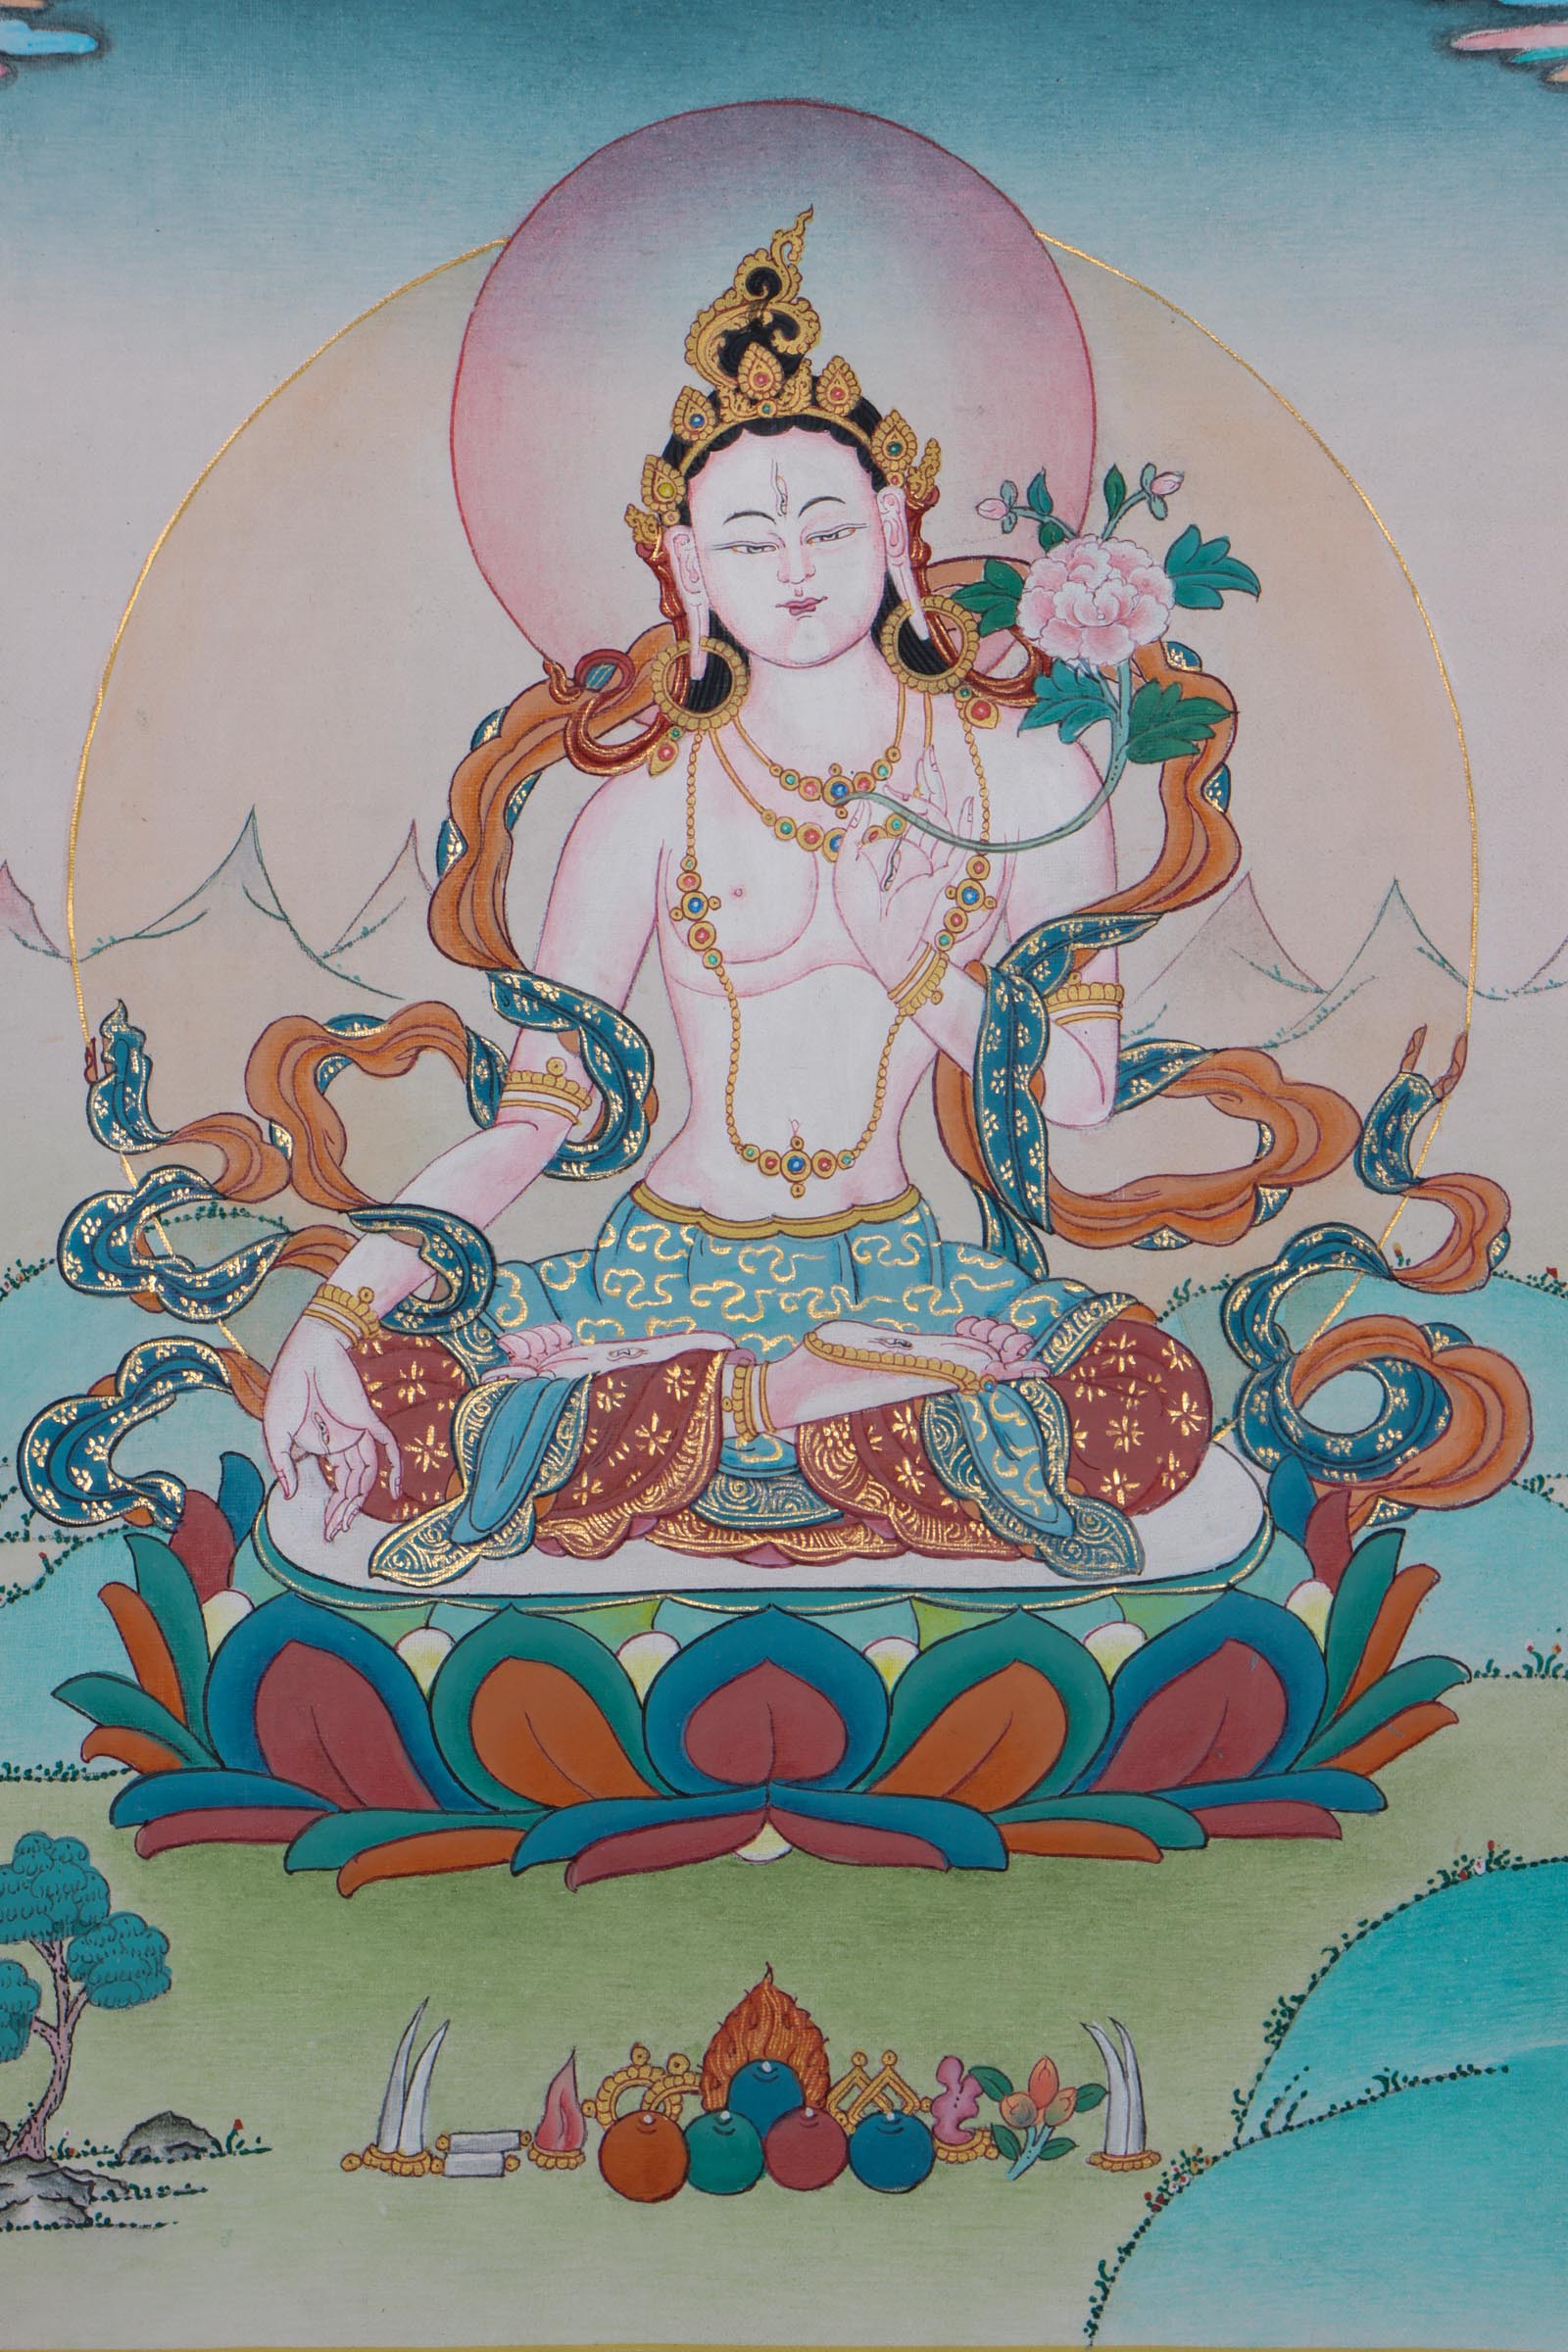 White Tara Thangka Painting on Cotton Canvas for Wall Hanging and meditation practice